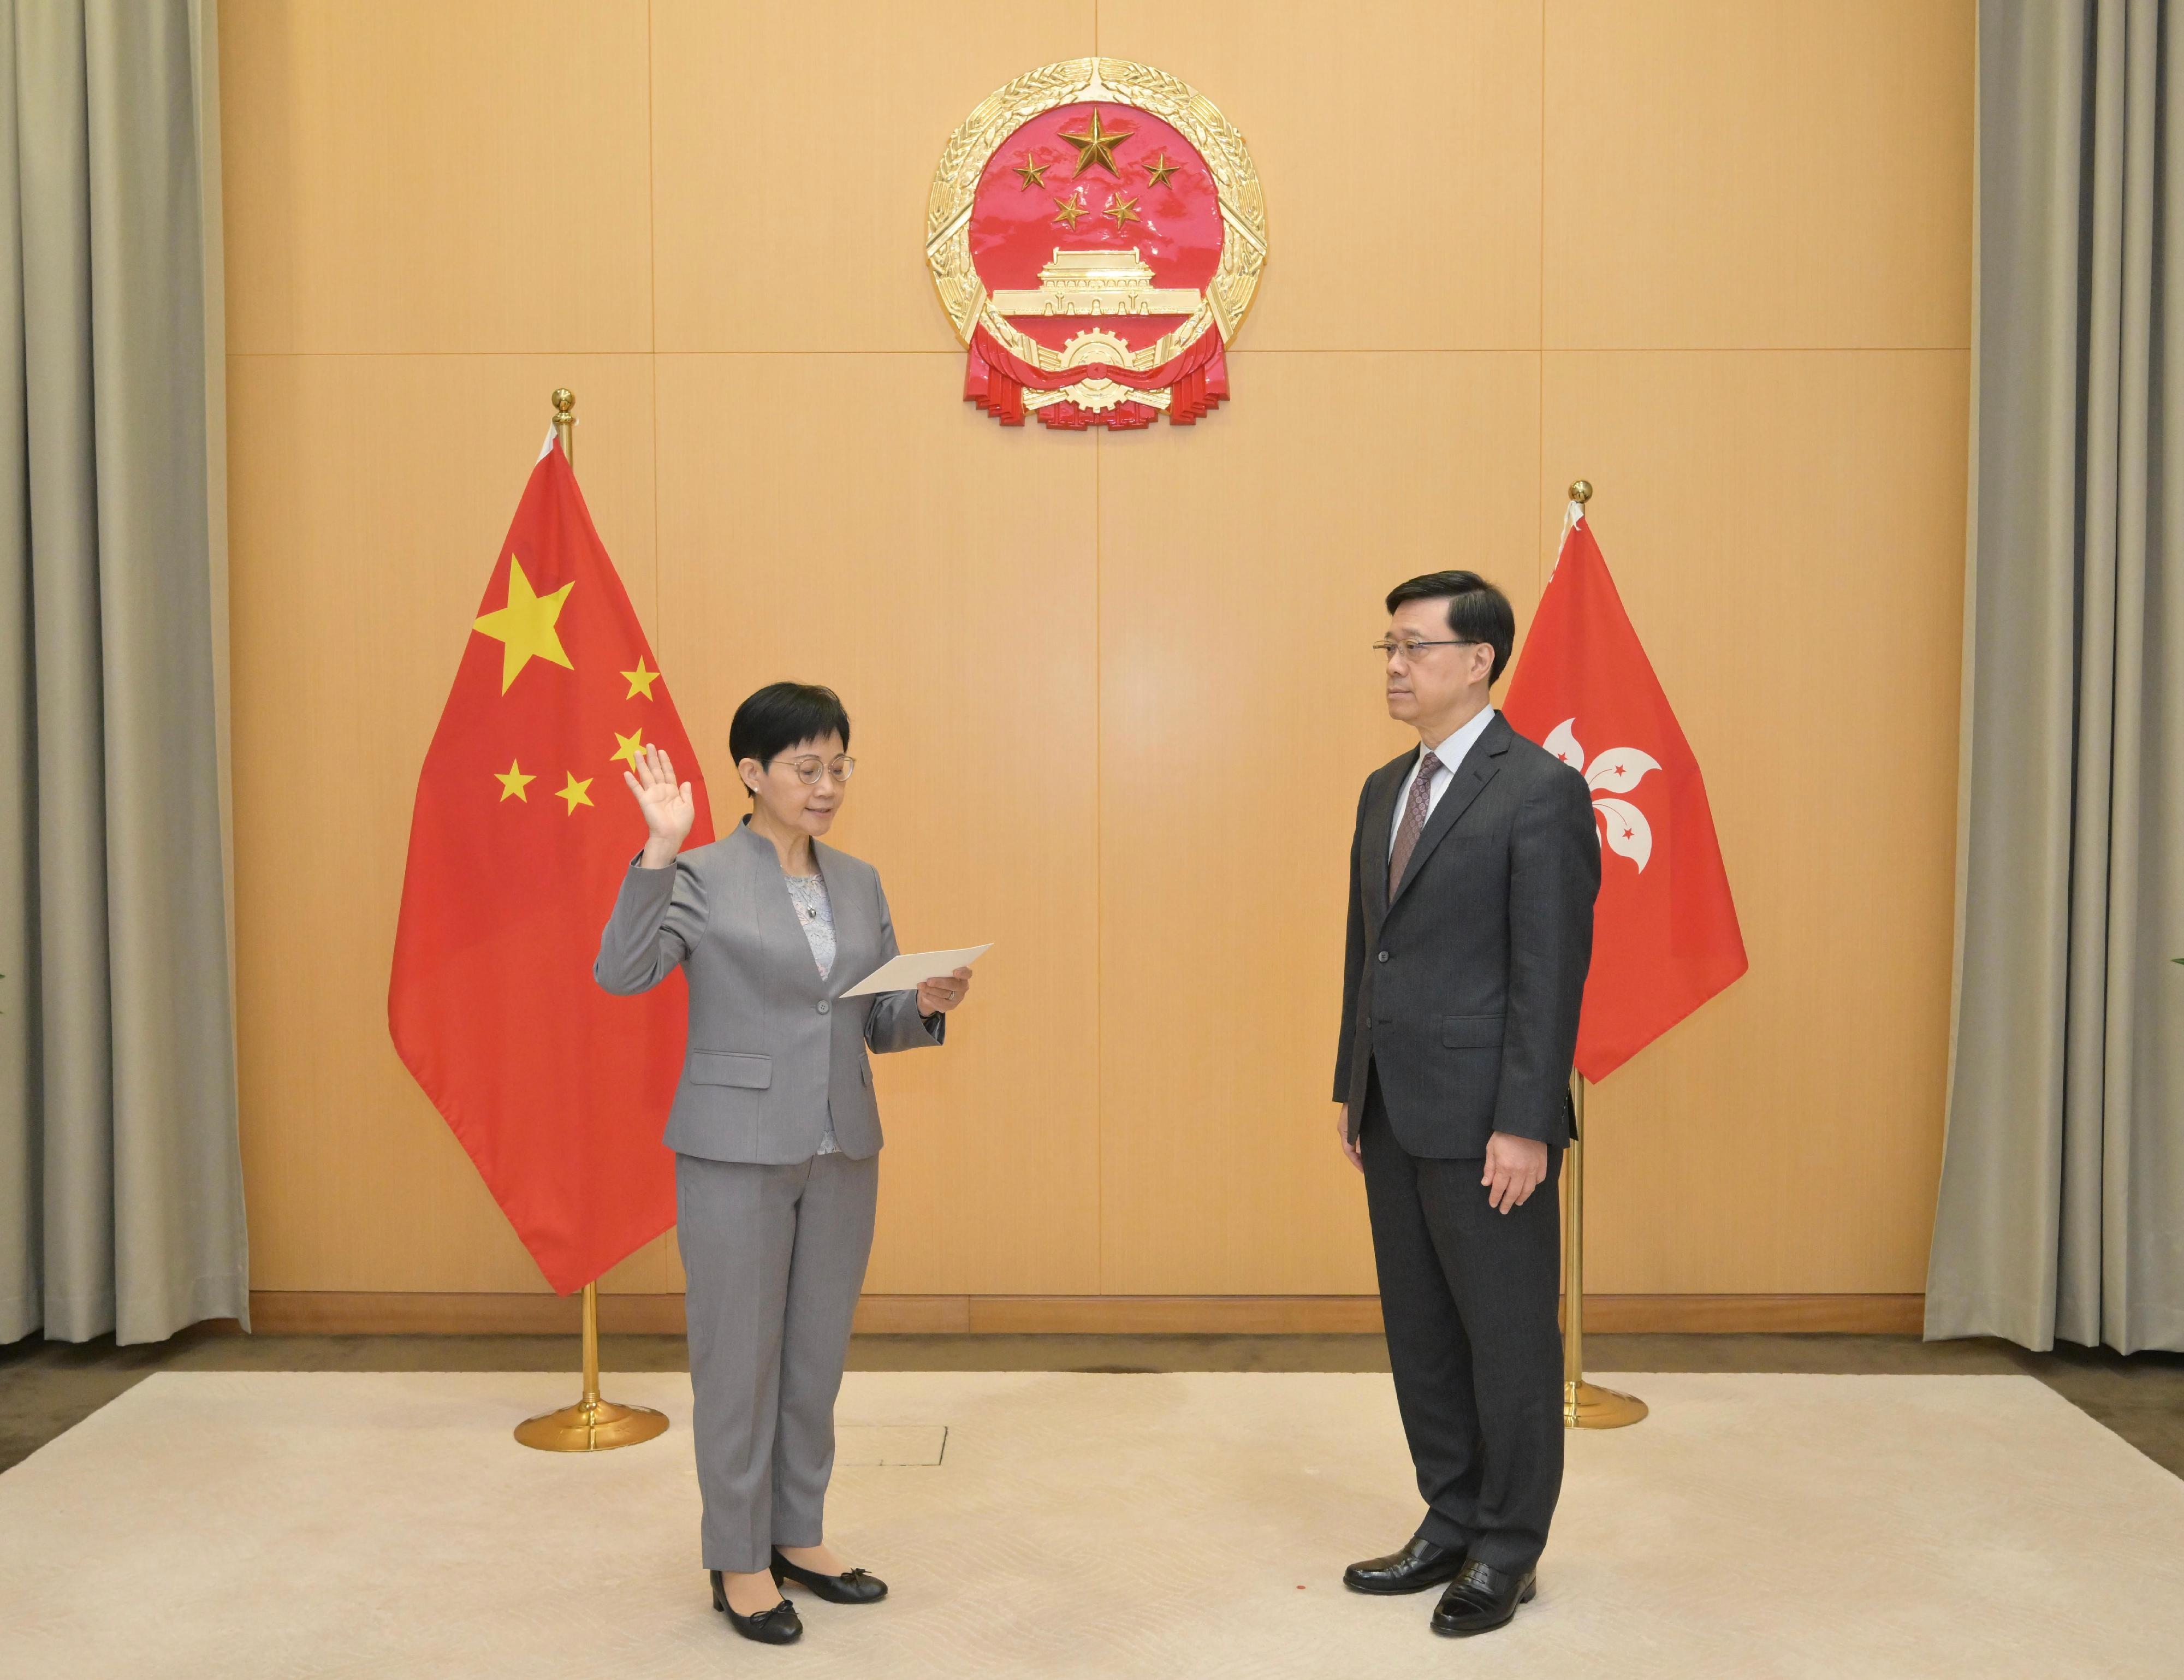 The new Chairperson of the Equal Opportunities Commission, Ms Linda Lam Mei-sau, today (April 10) took an oath, which was administered by the Chief Executive, Mr John Lee, and swore that she will uphold the Basic Law of the Hong Kong Special Administrative Region (HKSAR) of the People's Republic of China (PRC), bear allegiance to the HKSAR of the PRC and serve the HKSAR conscientiously, dutifully, in full accordance with the law, honestly and with integrity.  